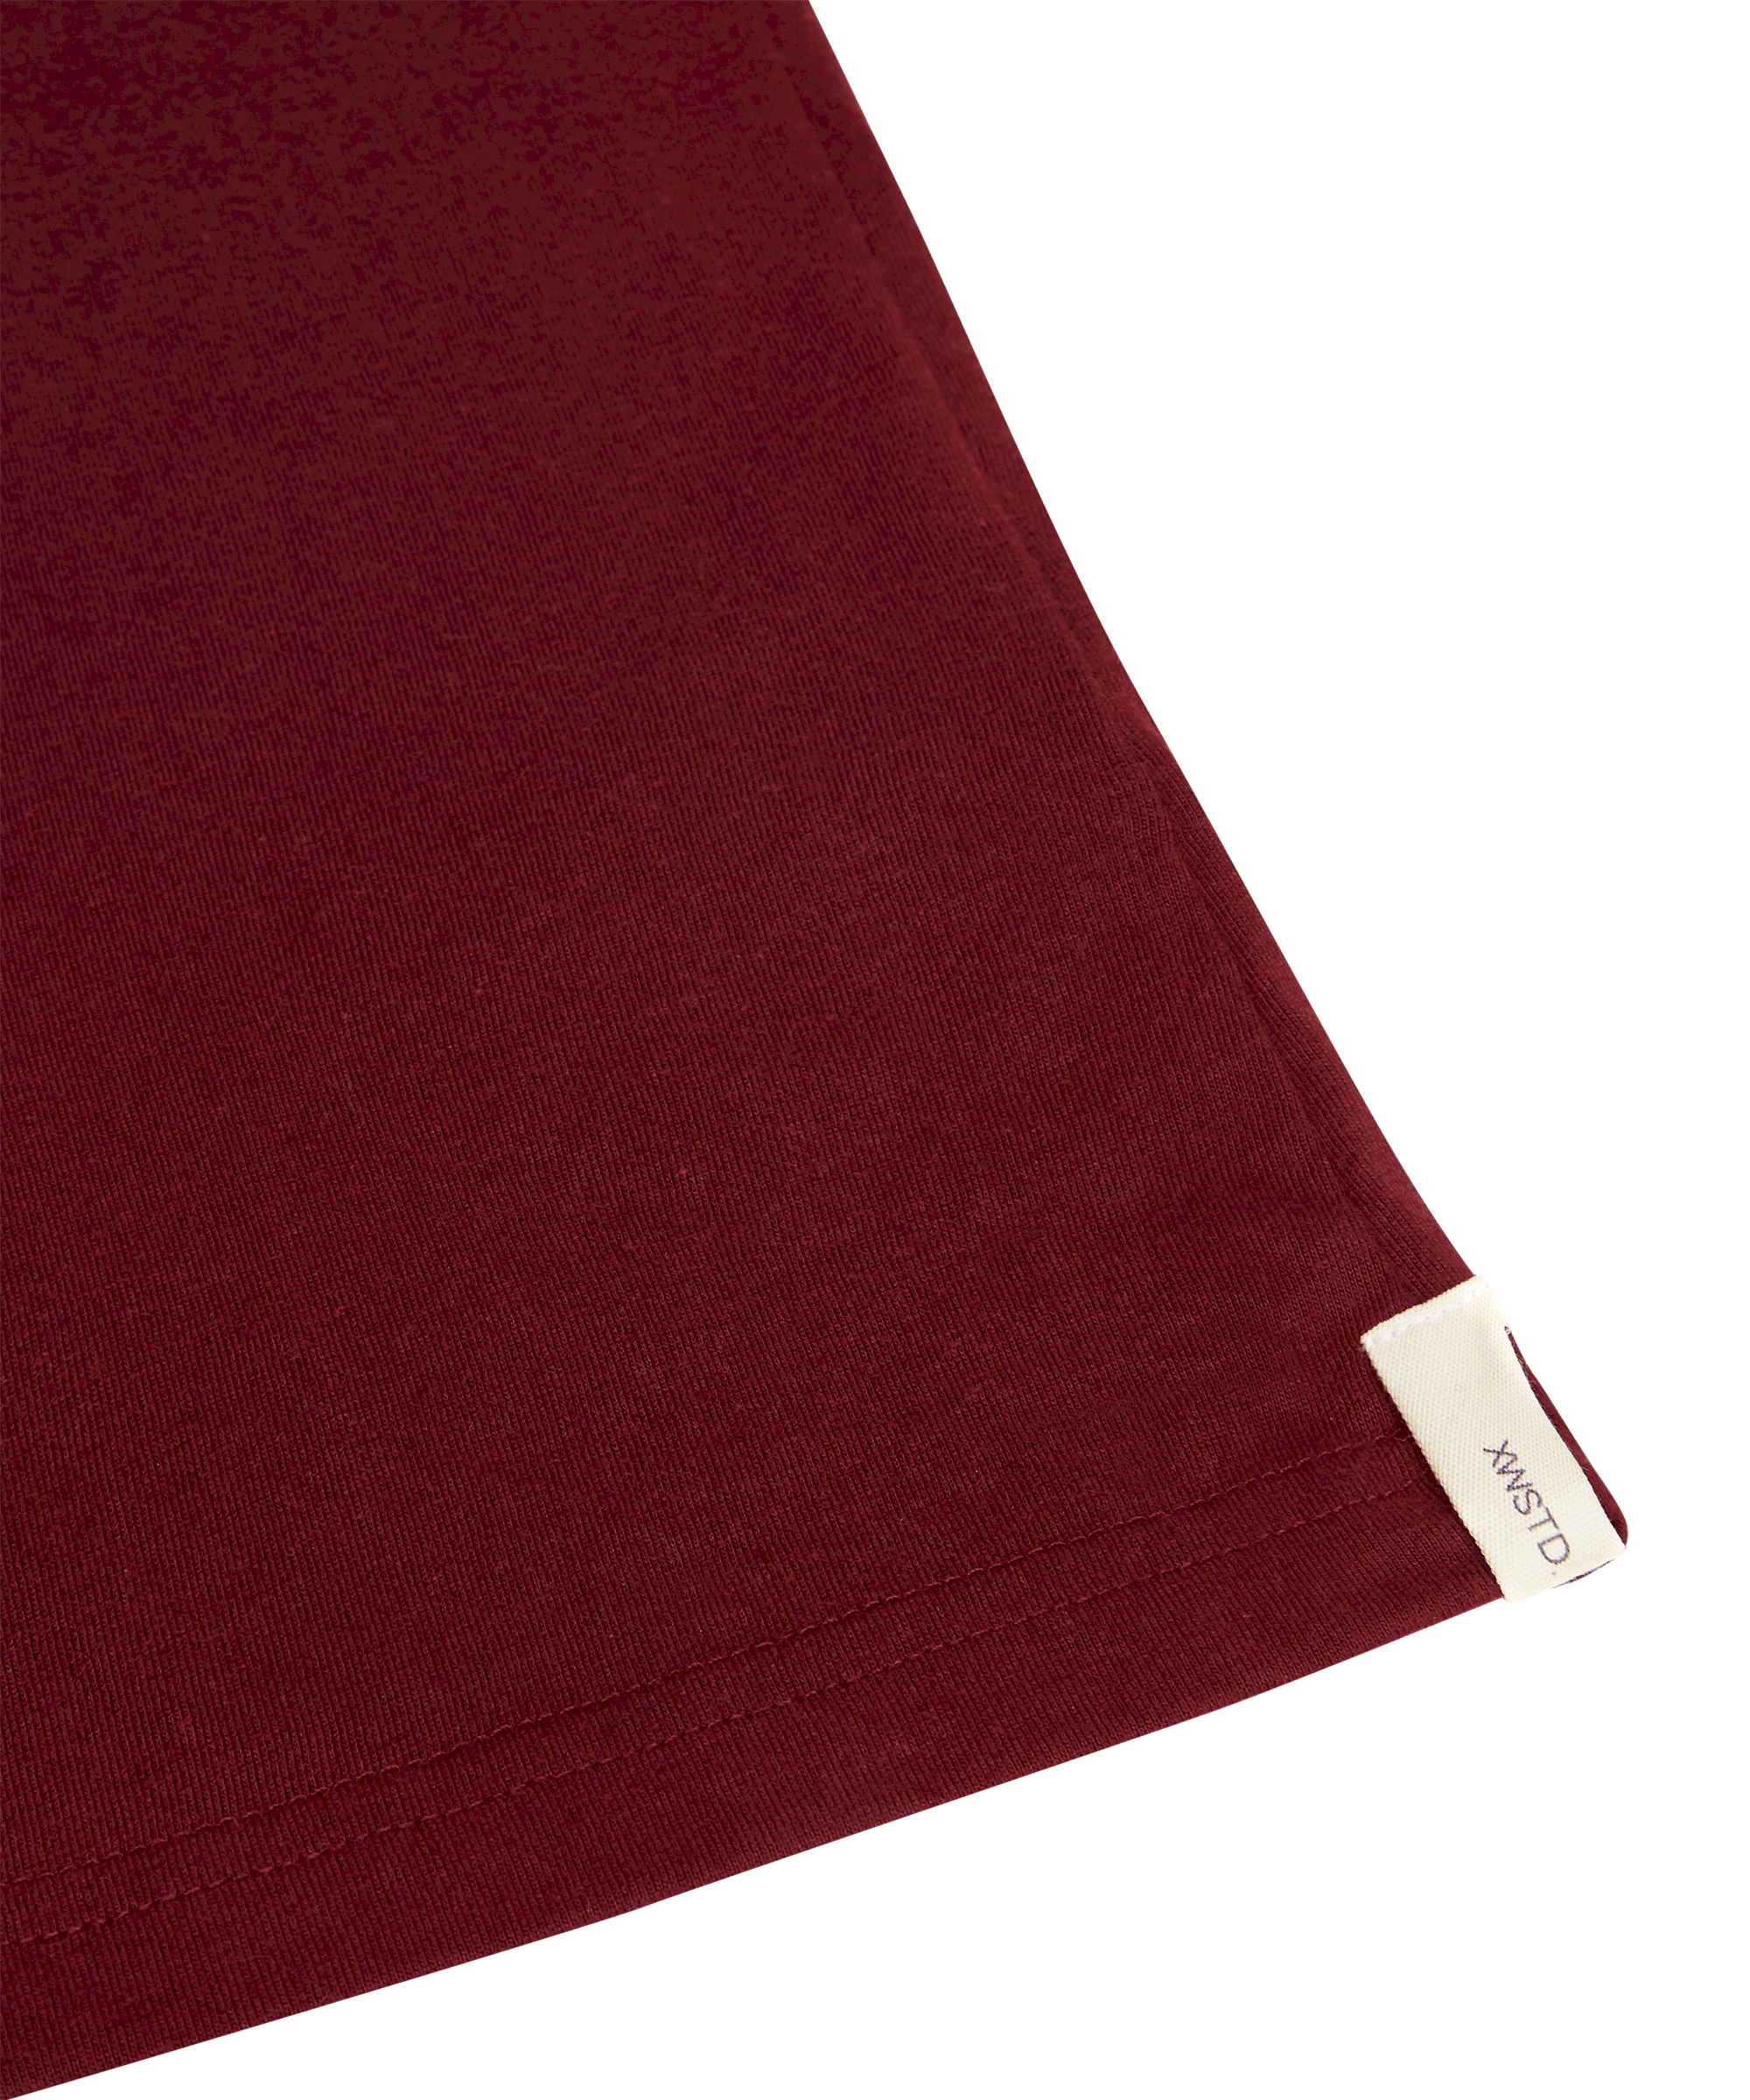 XWASTED hem label of pure burgundy organic 100% recycled t-shirt 